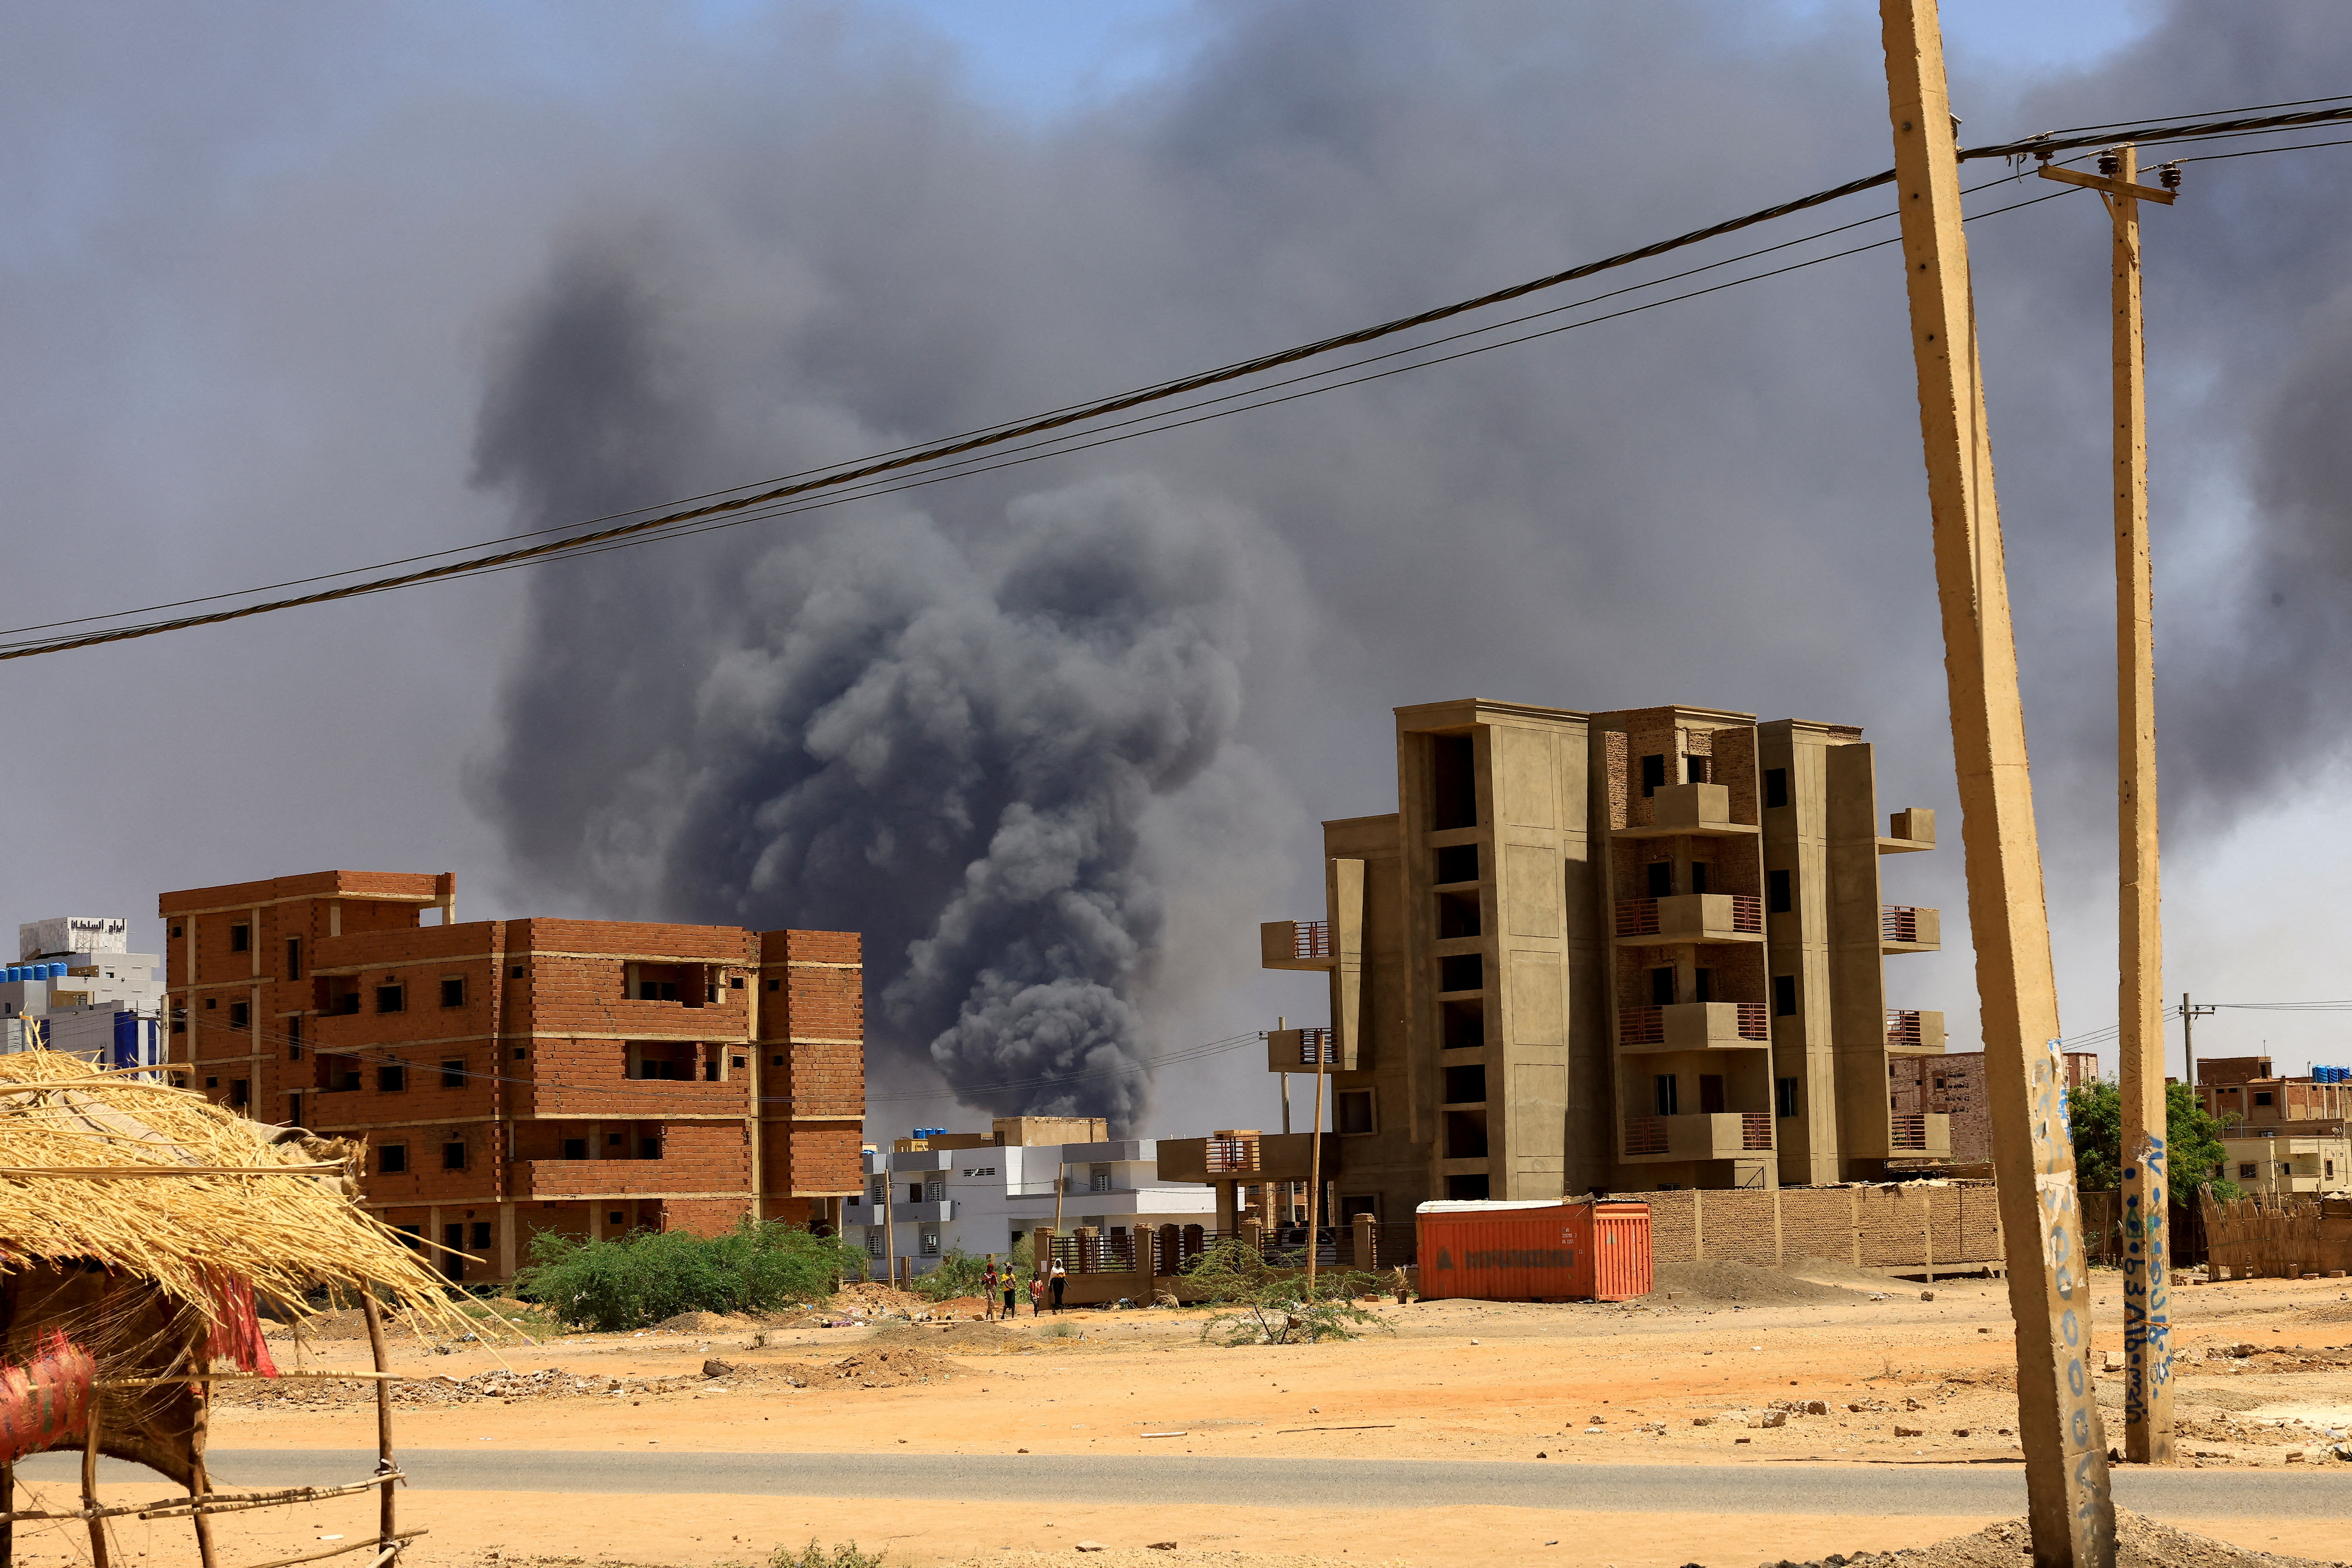 Smoke rises above buildings after an aerial bombardment in Khartoum North